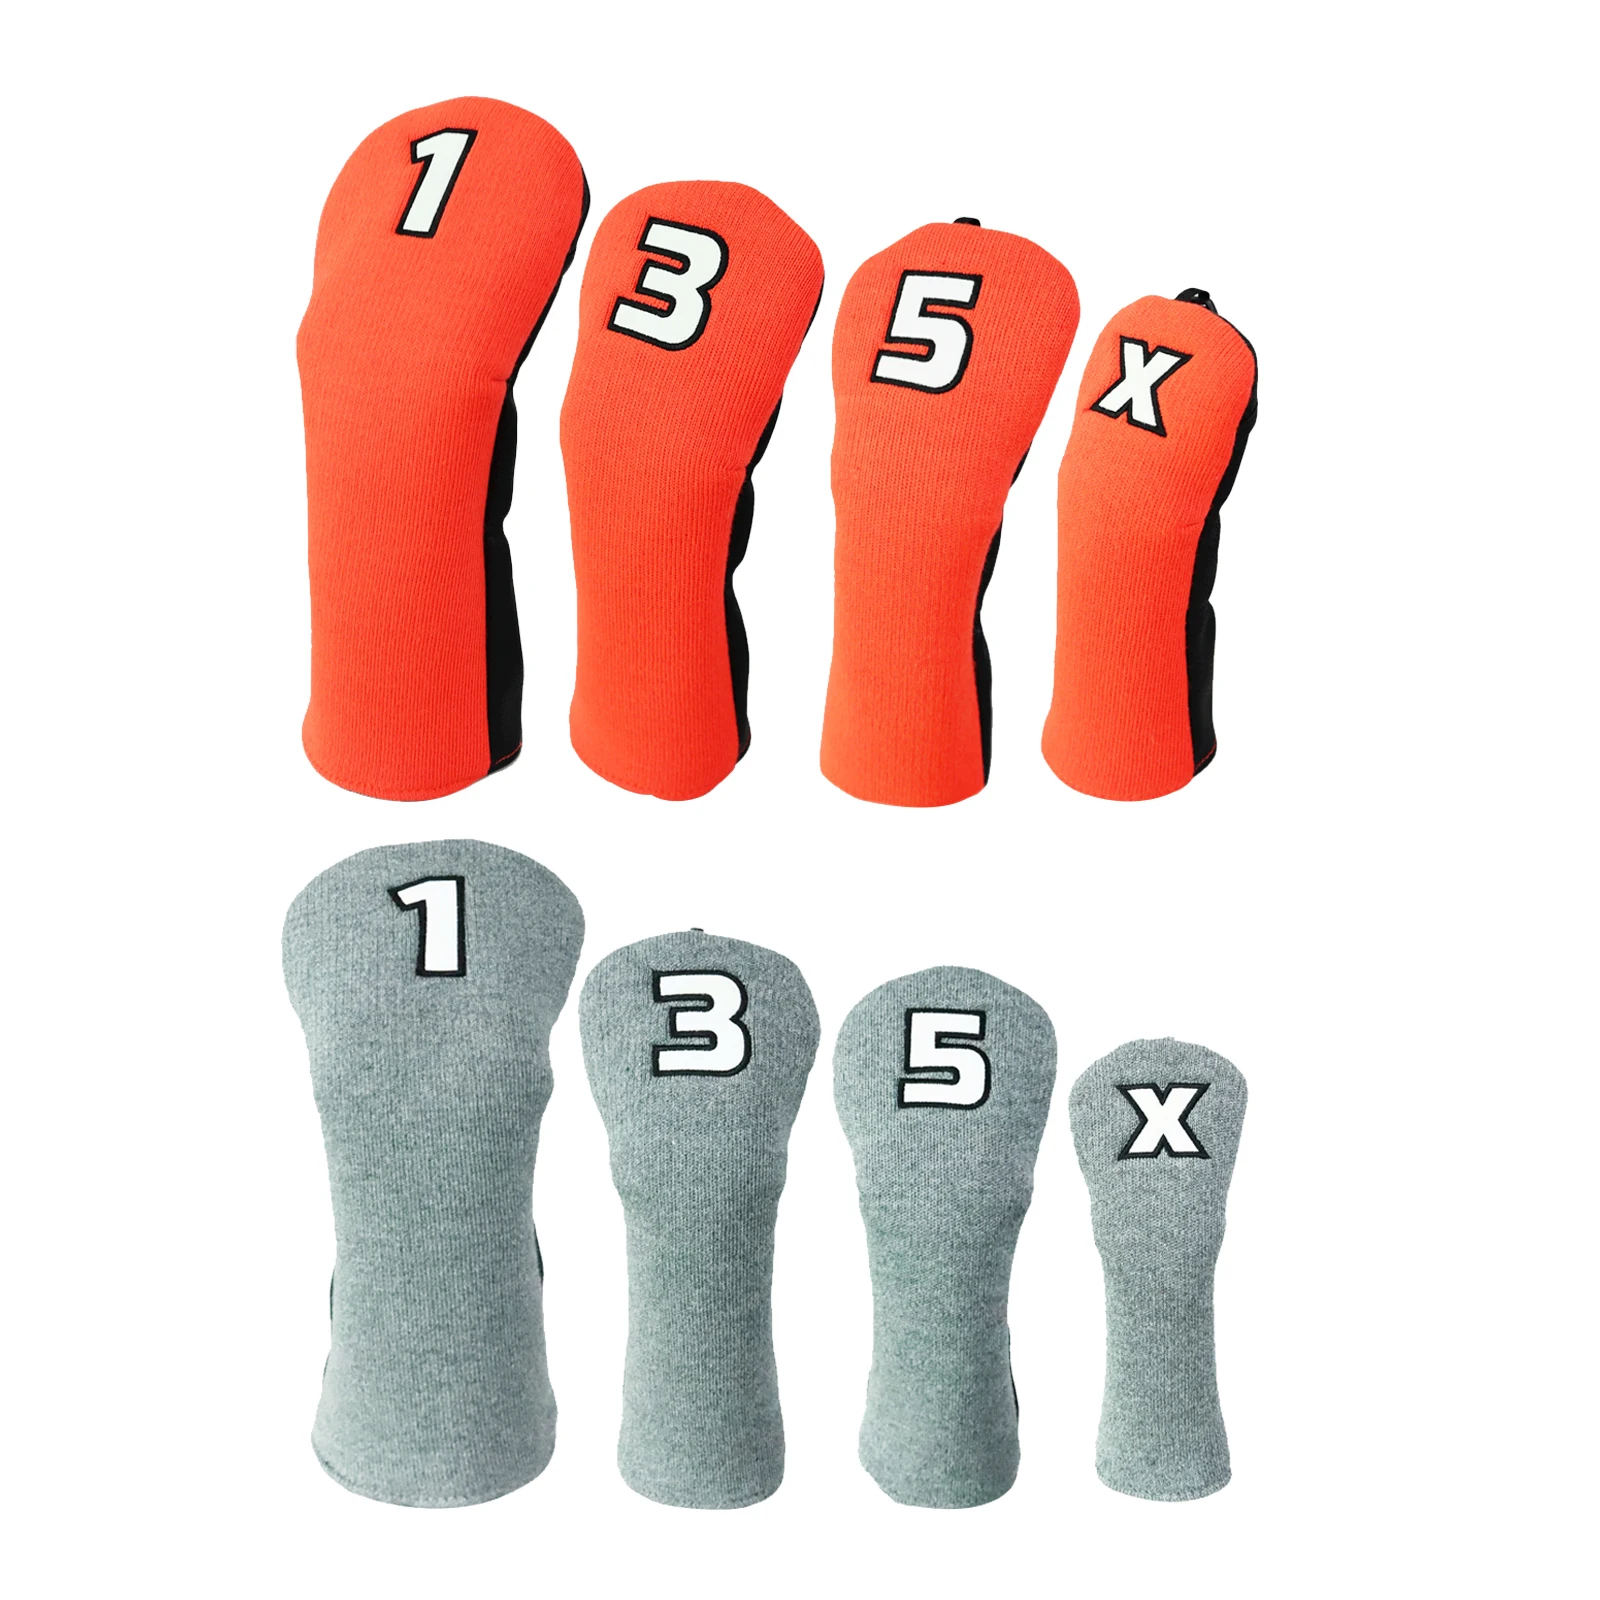 

4x Creative Golf Wood Headcover Green No.1/3/5 UT Drivers Head Covers Fairway Head Cover Protector Long Neck Golf Head Cover